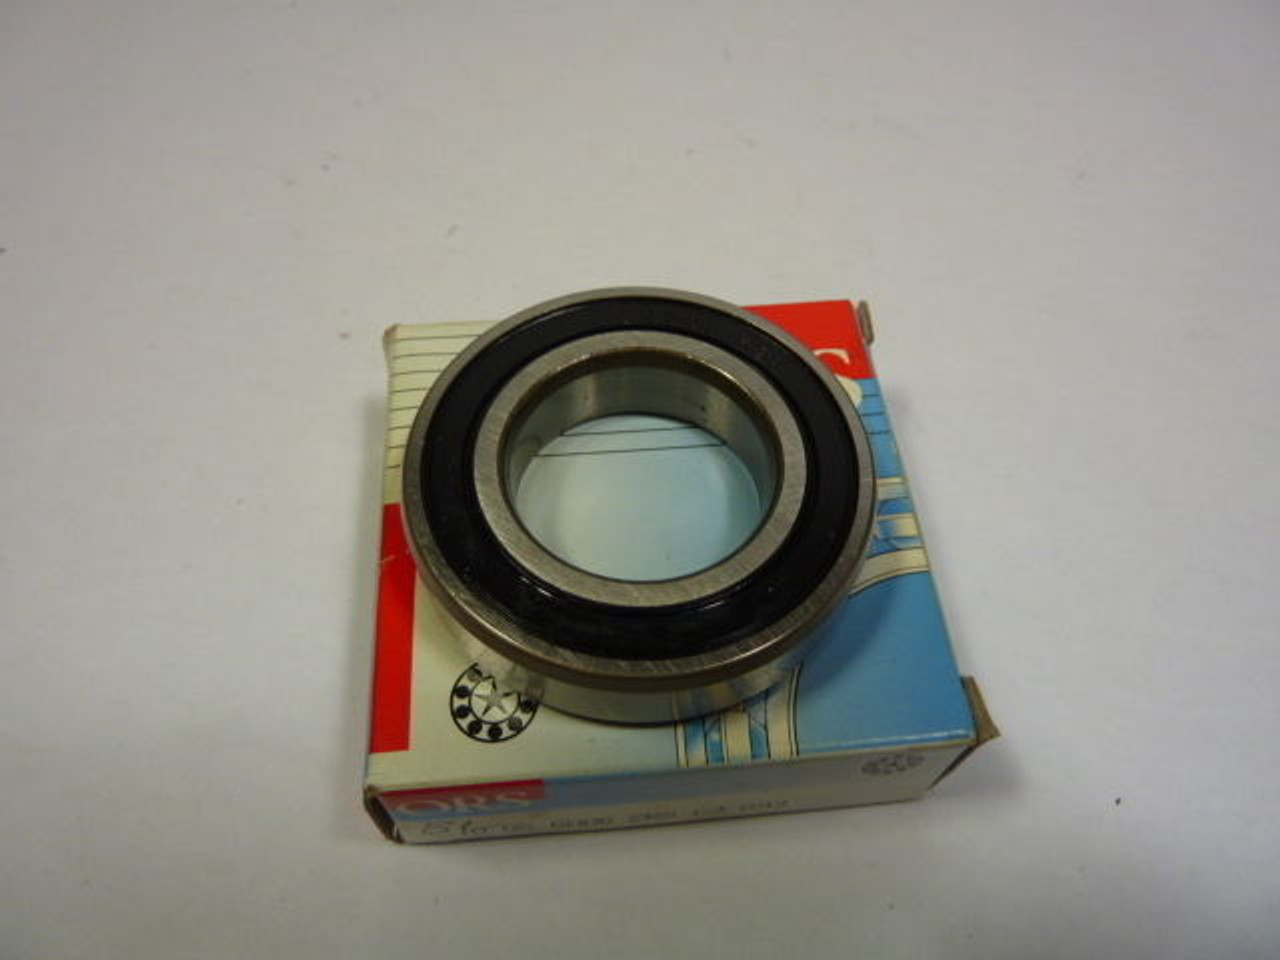 ORS 10-05-6006-2RS-C3-G93 Roller Bearing ! NEW !